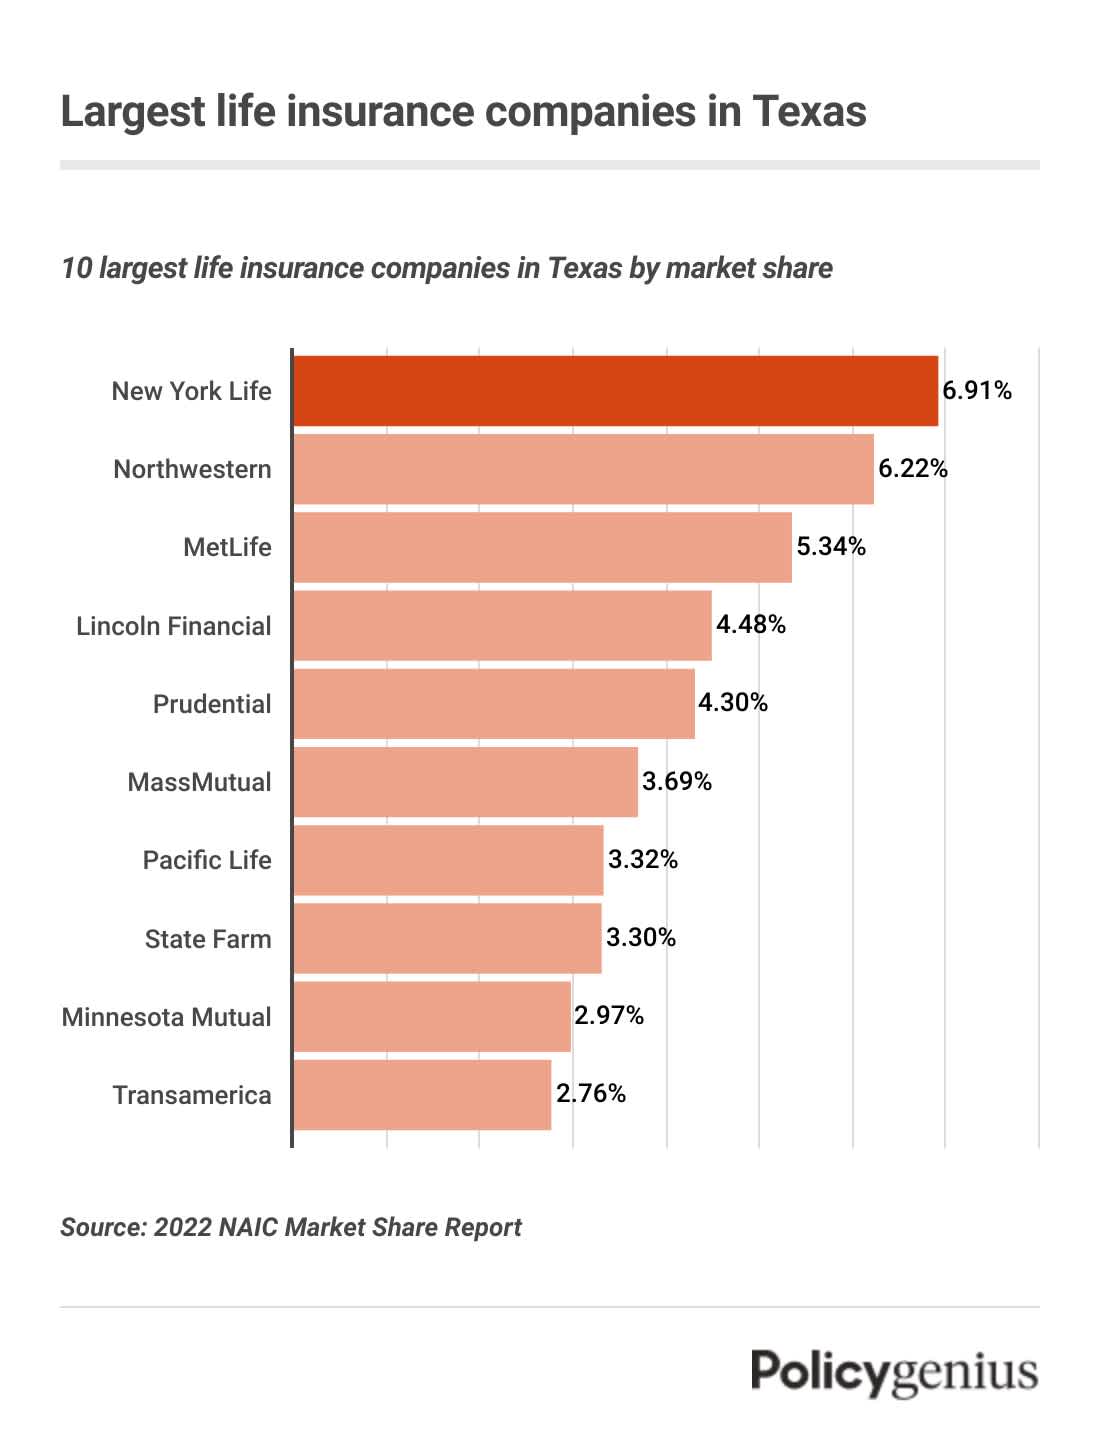 A bar graph showing the largest life insurance companies in Texas.